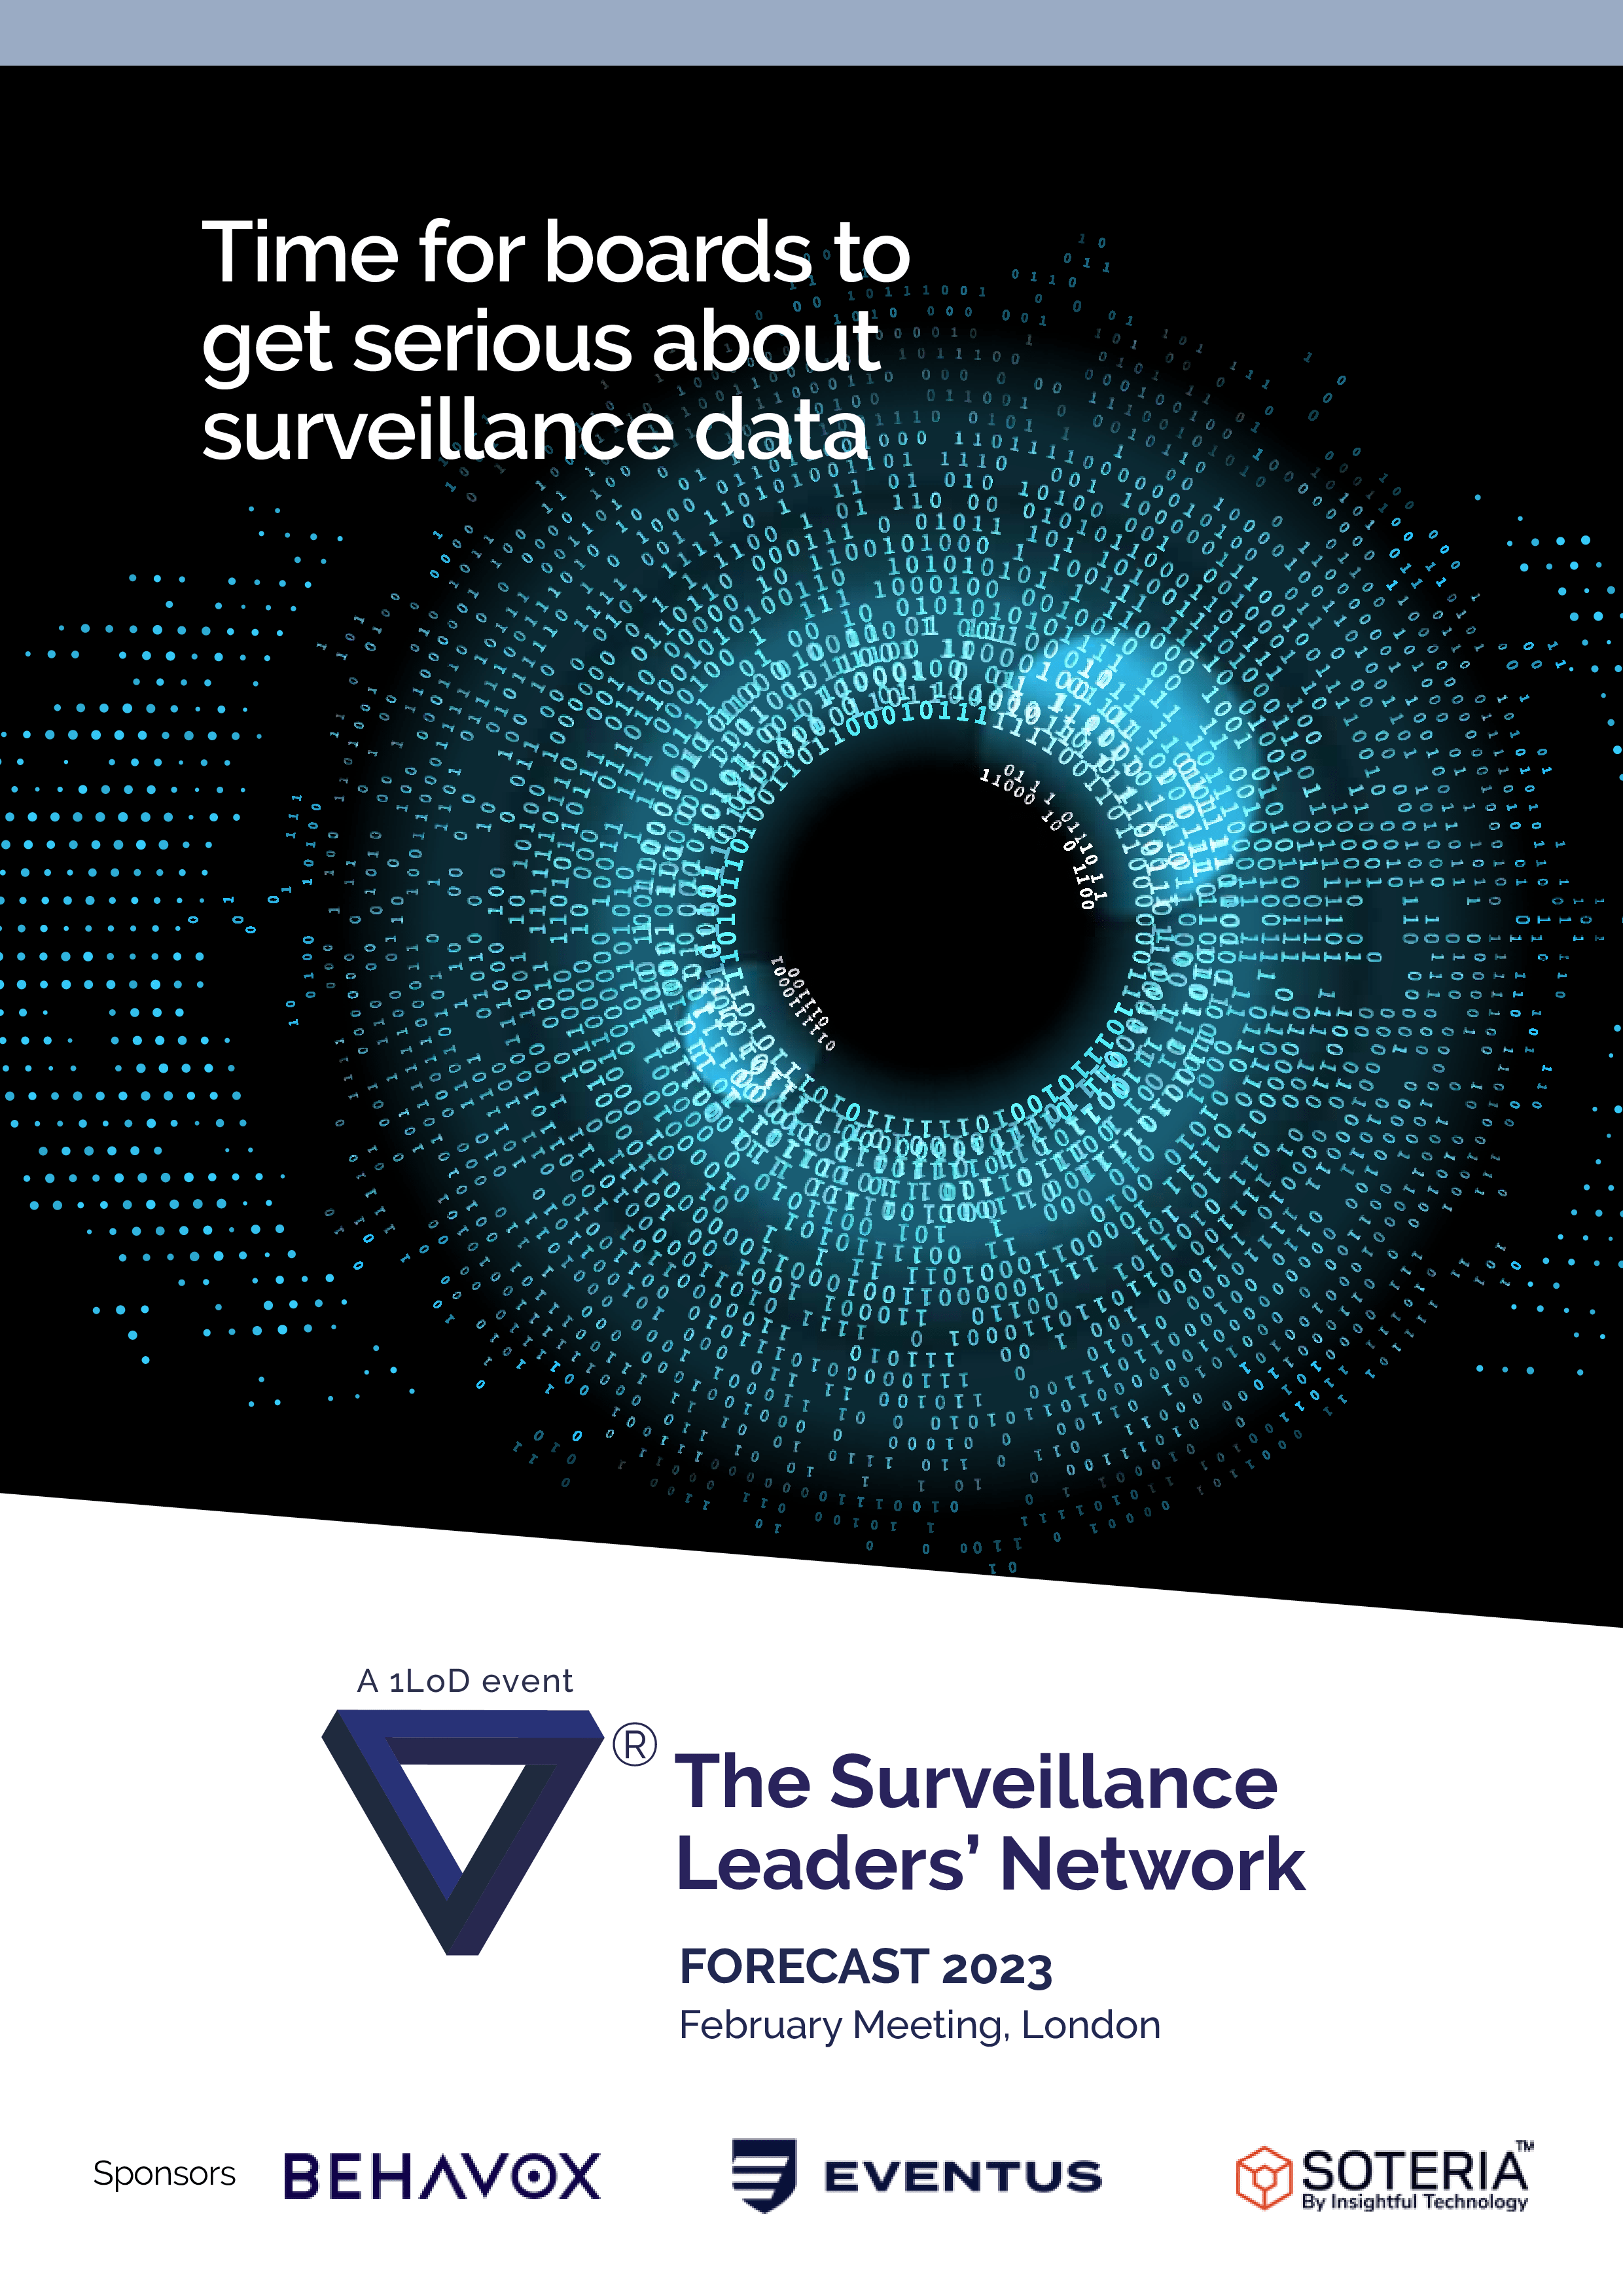 Time for boards to take surveillance data seriously